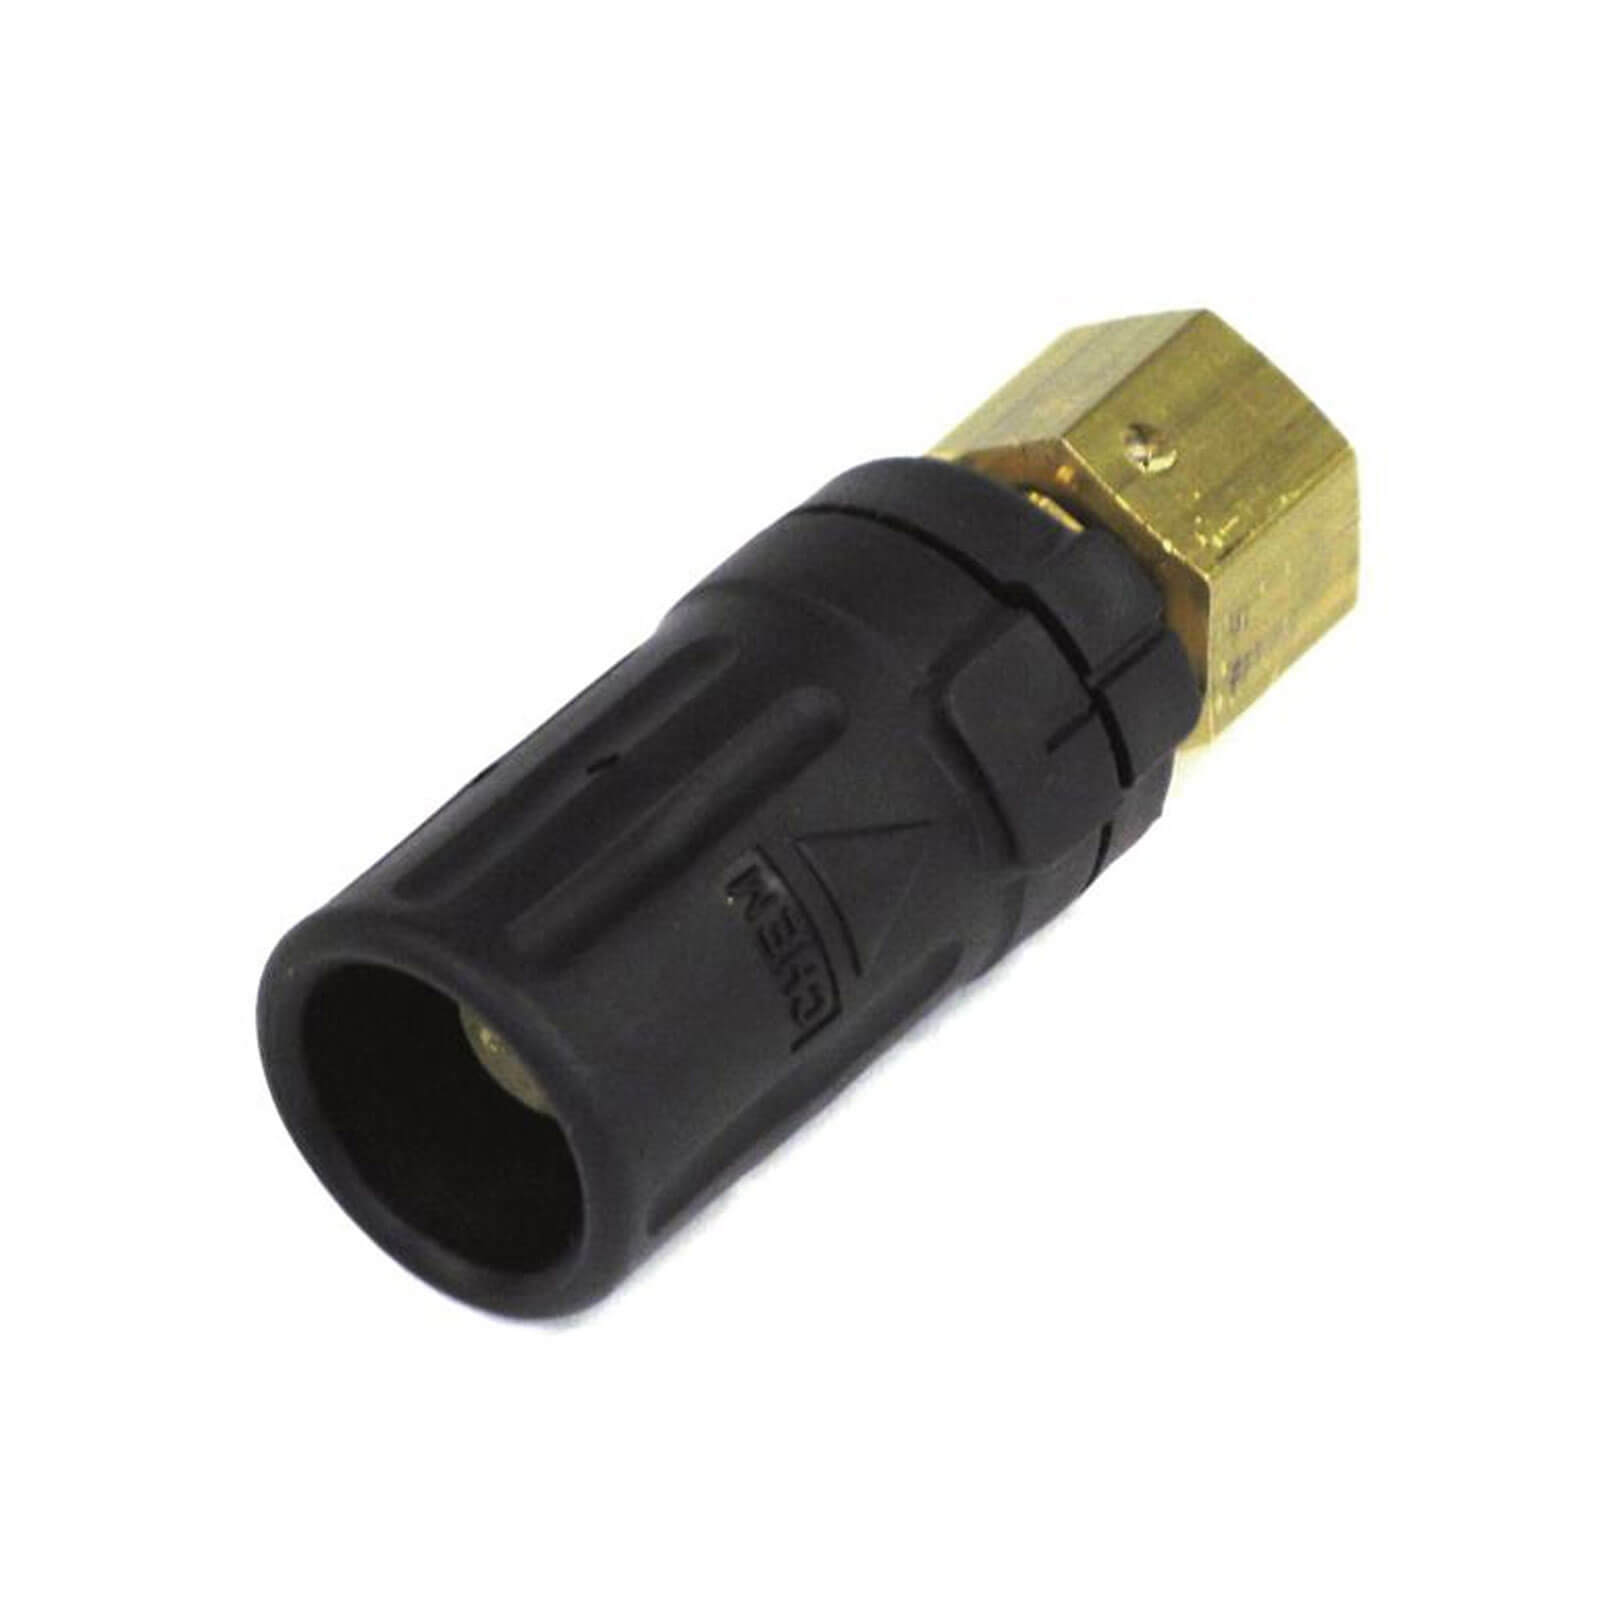 Karcher Basic Triple Jet Nozzle for HD and XPERT Pressure Washers (Not Easy!Lock)